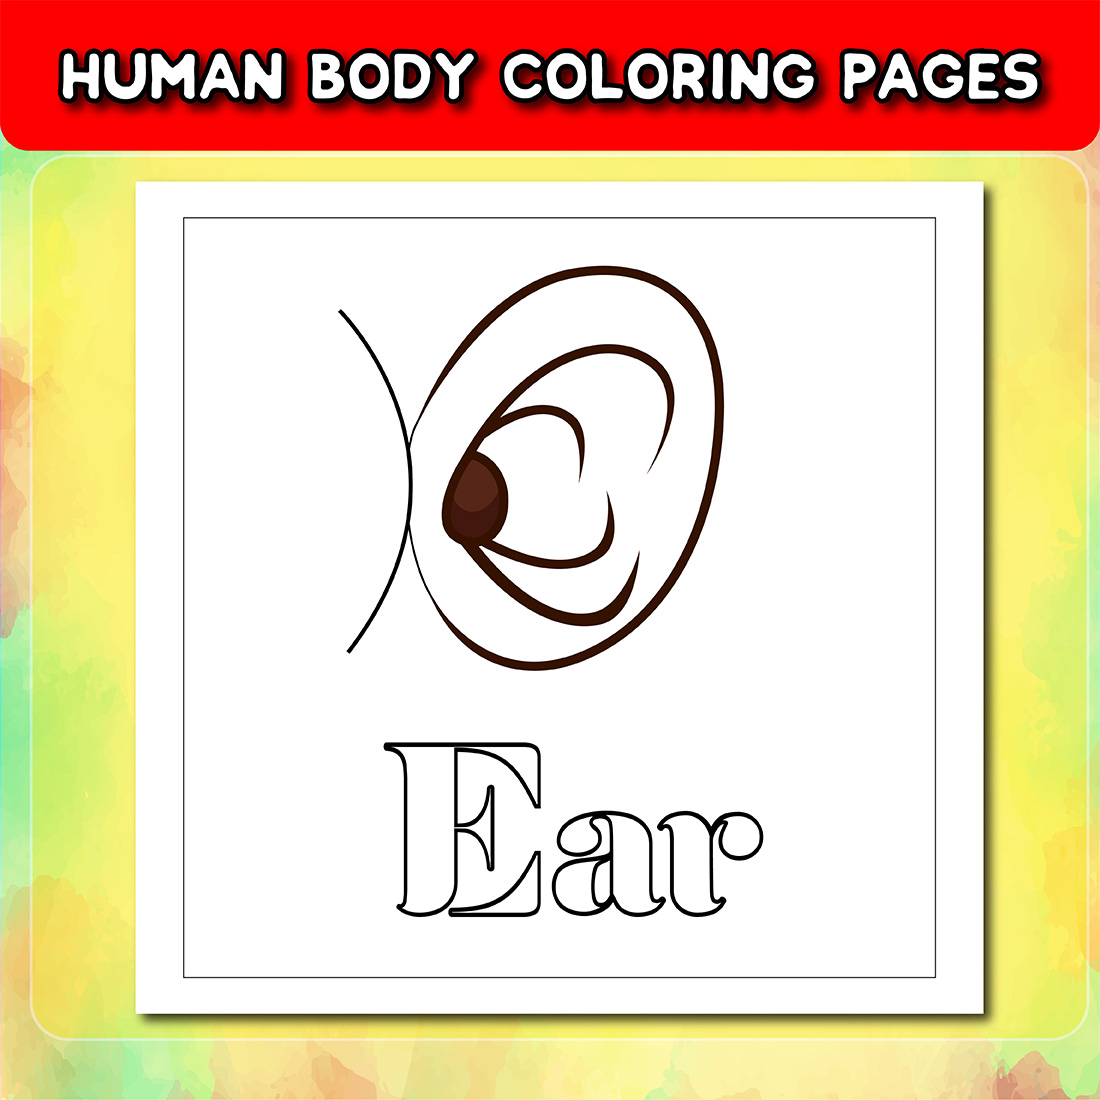 Human Body Coloring Pages for Kids cover image.